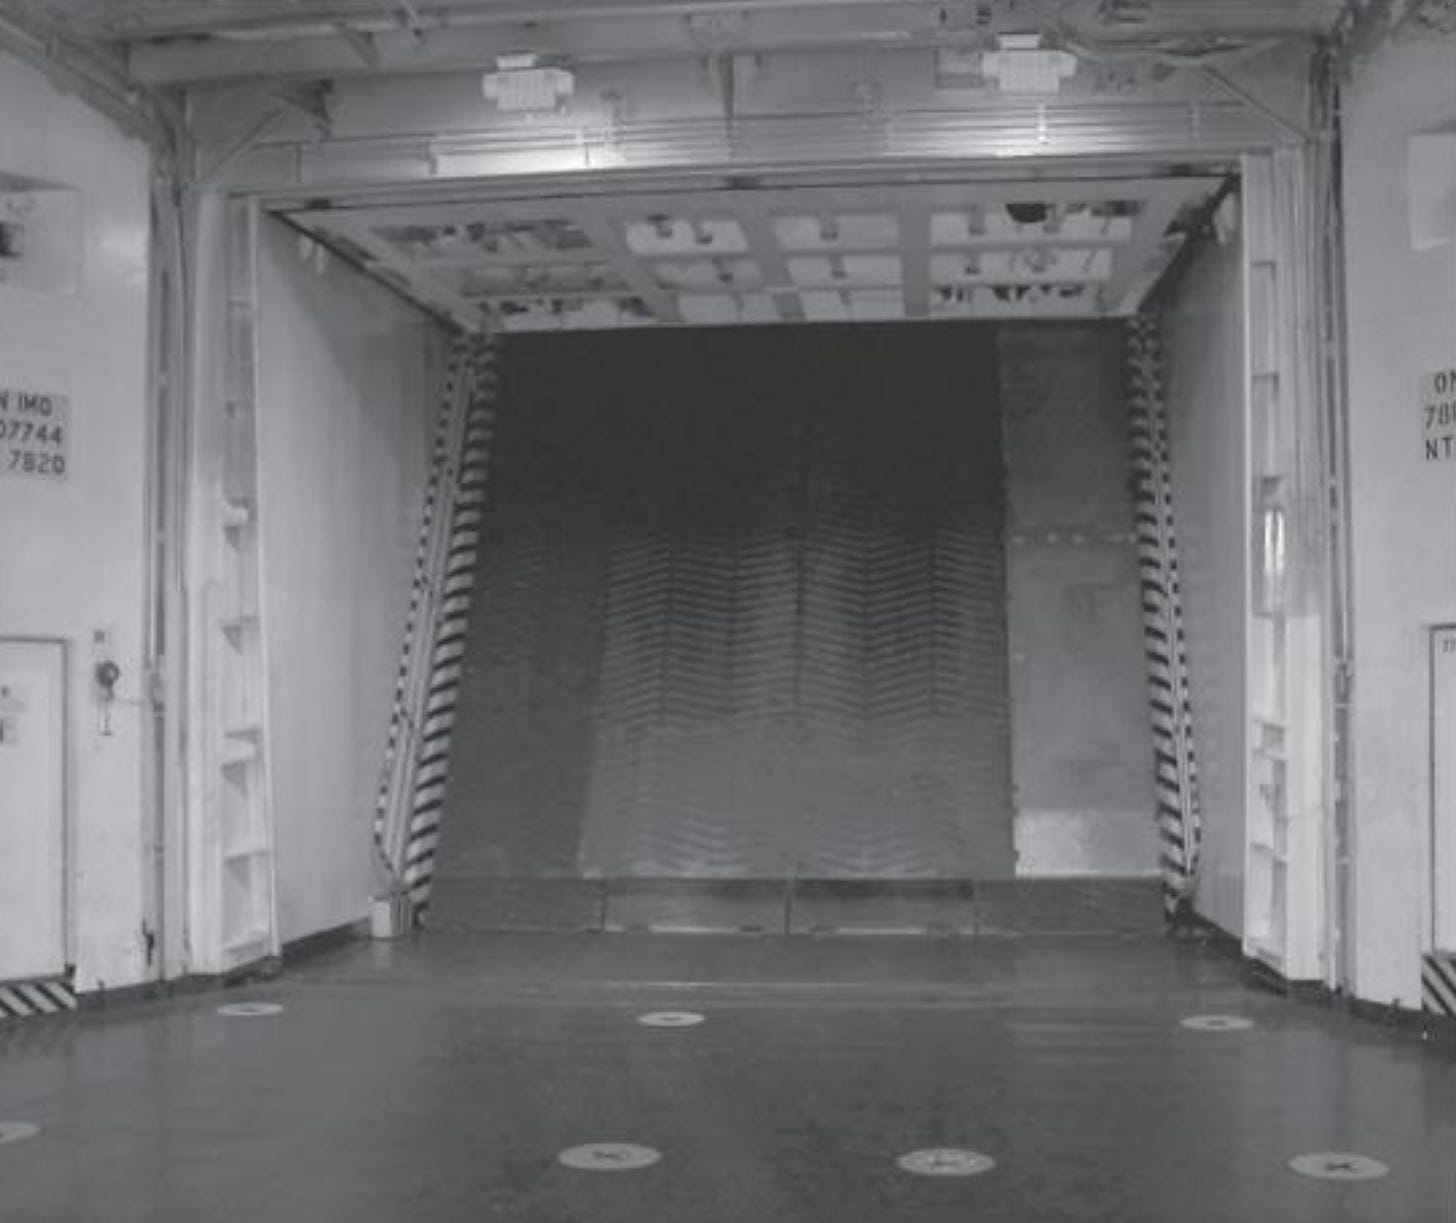 Loading ramp, as seen from inside. This loading ramp folds up and provides the watertight seal. It is concealed behind the bow visor. With the ramp up, it is not possible to see the bow visor. The bow visor’s purpose is to act as a wave break, but is not watertight.